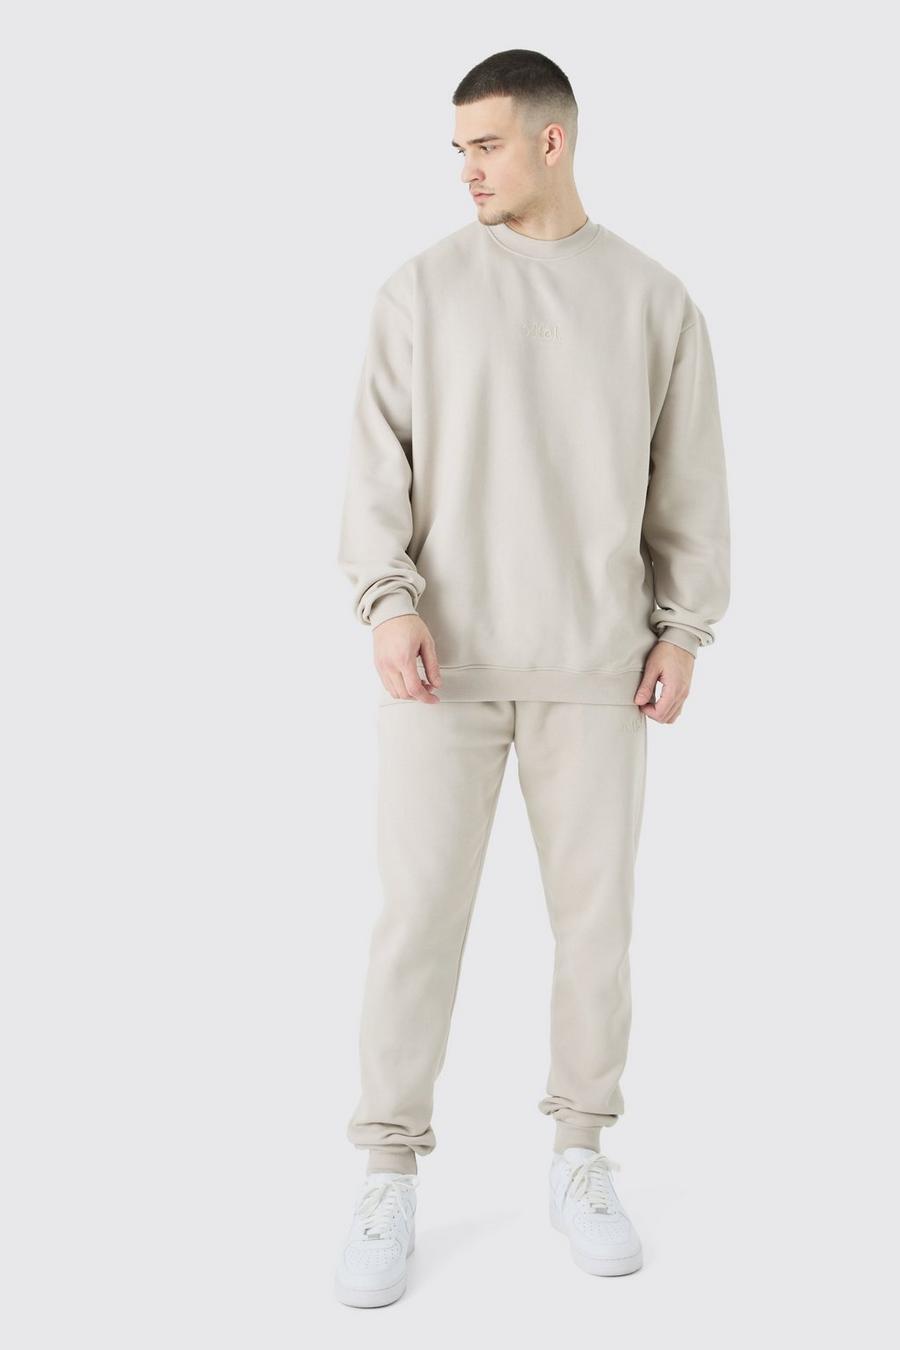 Stone Tall Offcl Oversized Extended Neck Sweatshirt Tracksuit